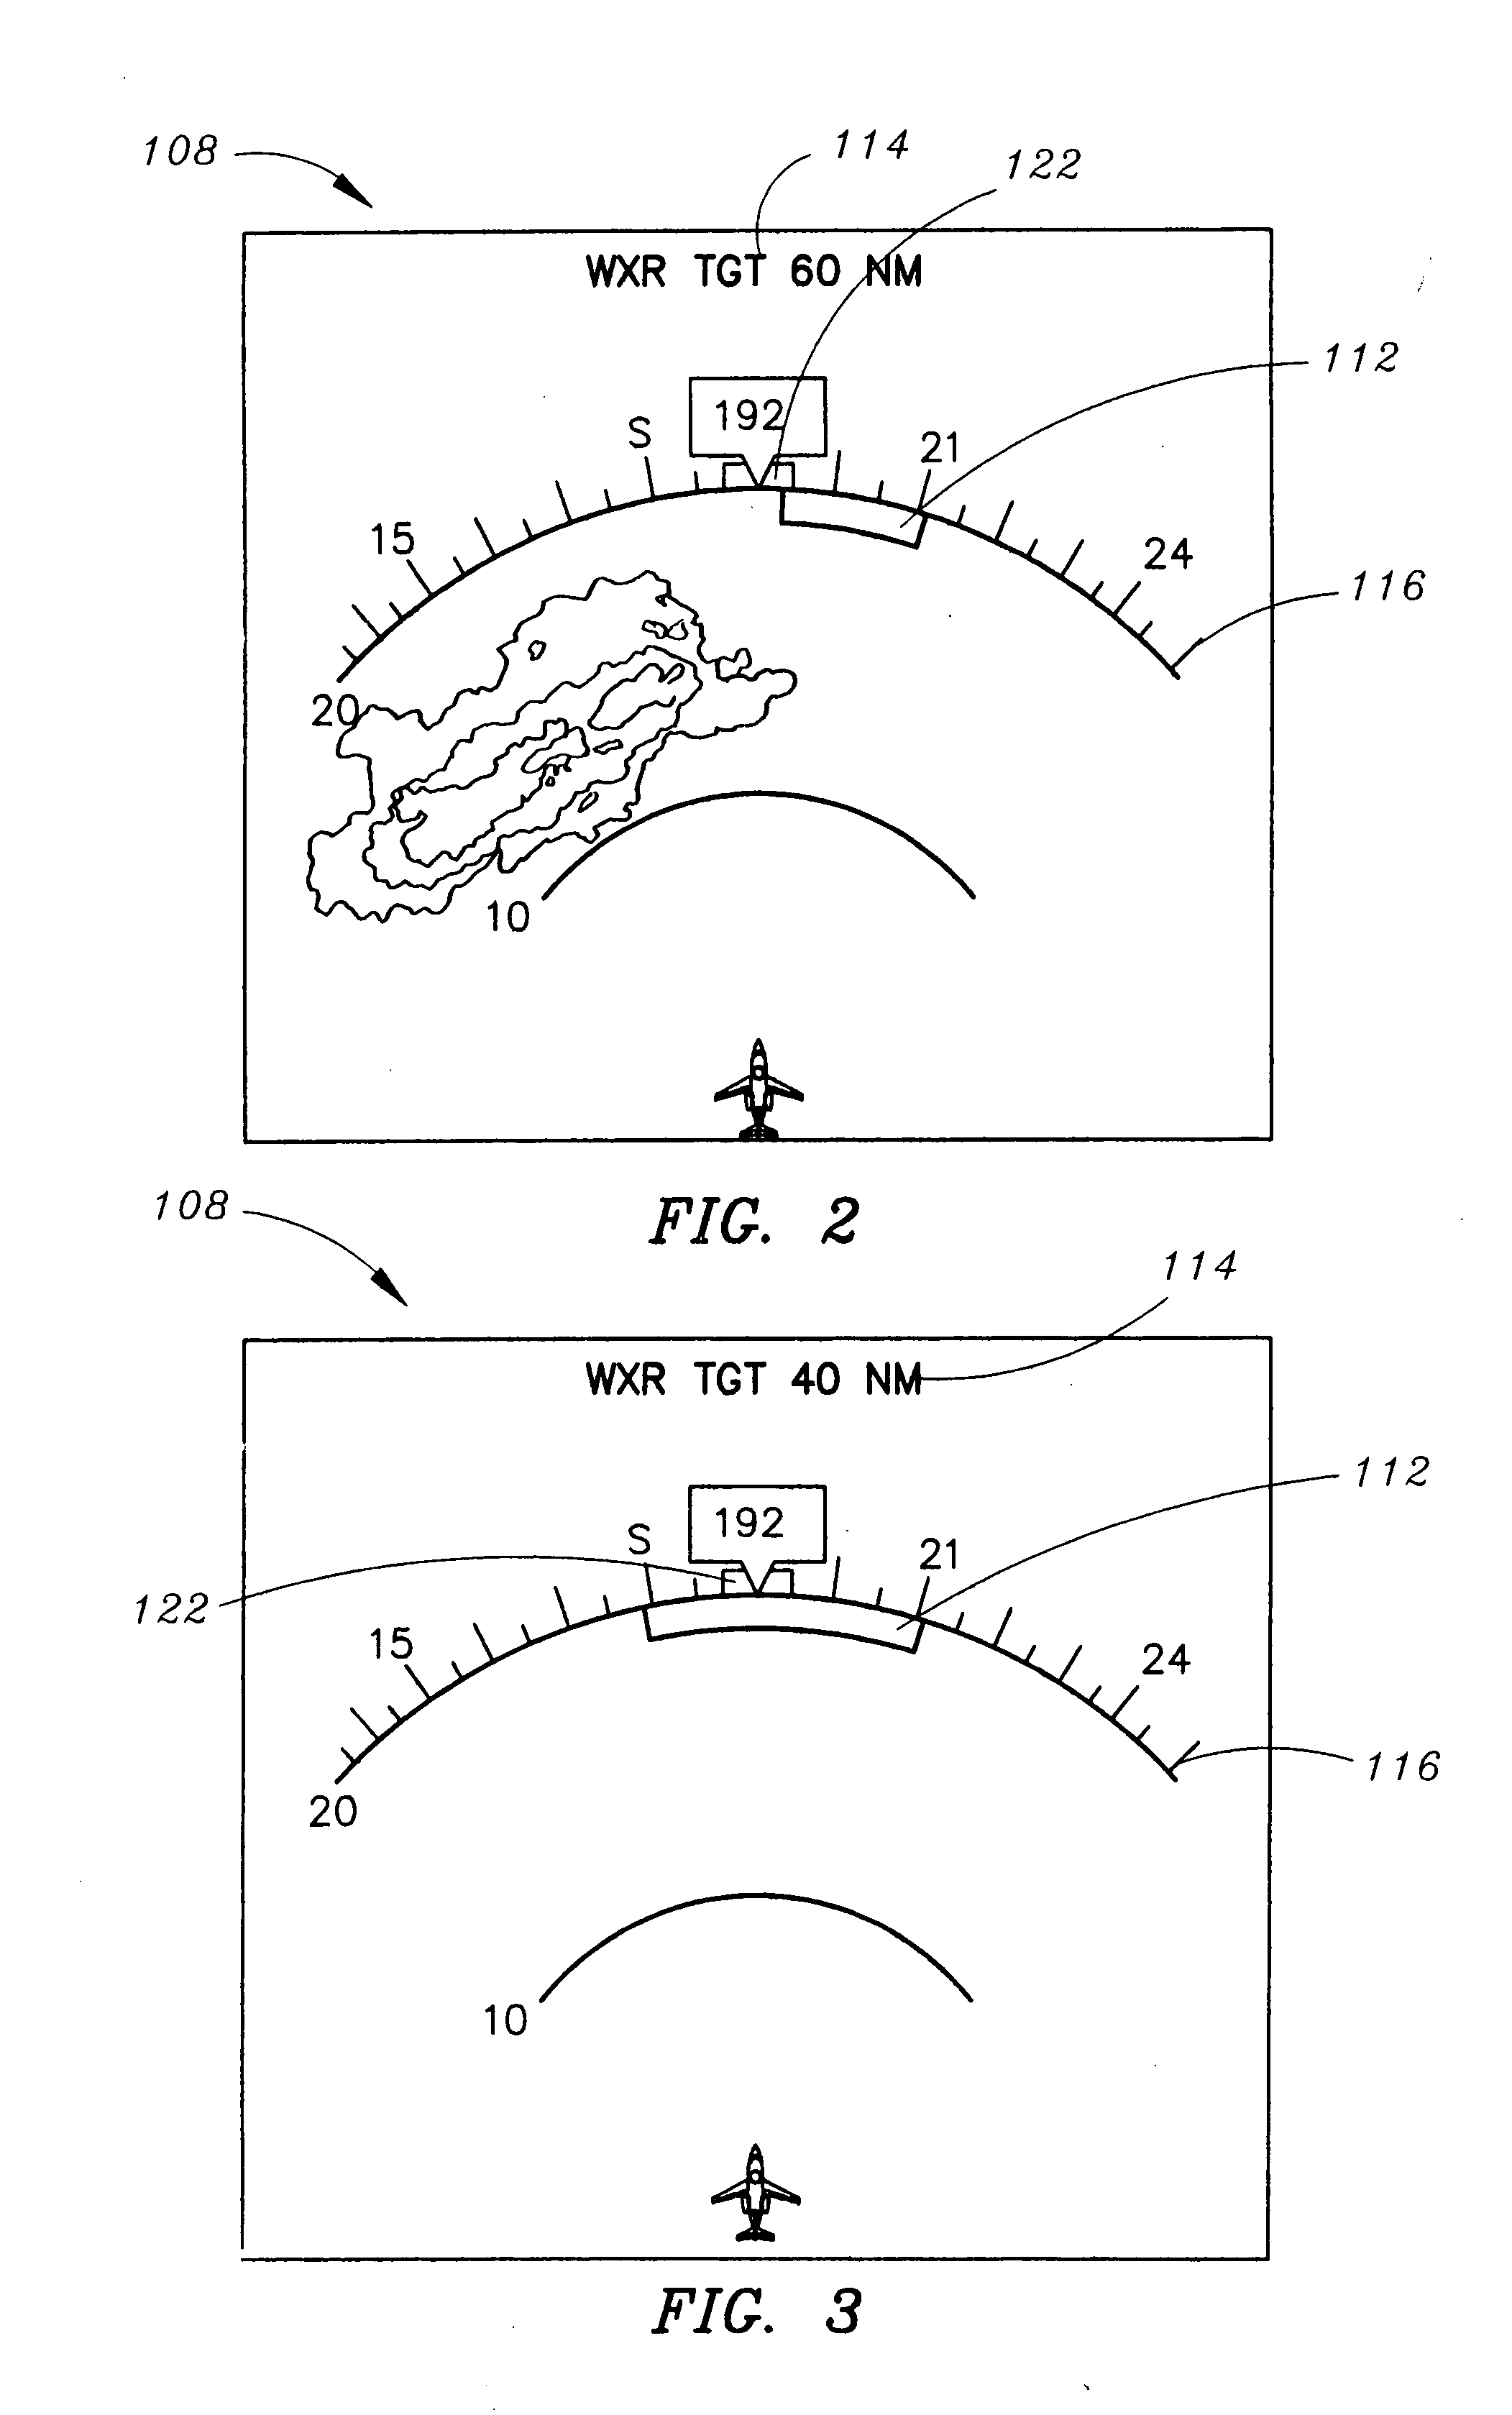 System and method for providing enhanced weather hazard alerting for aircraft